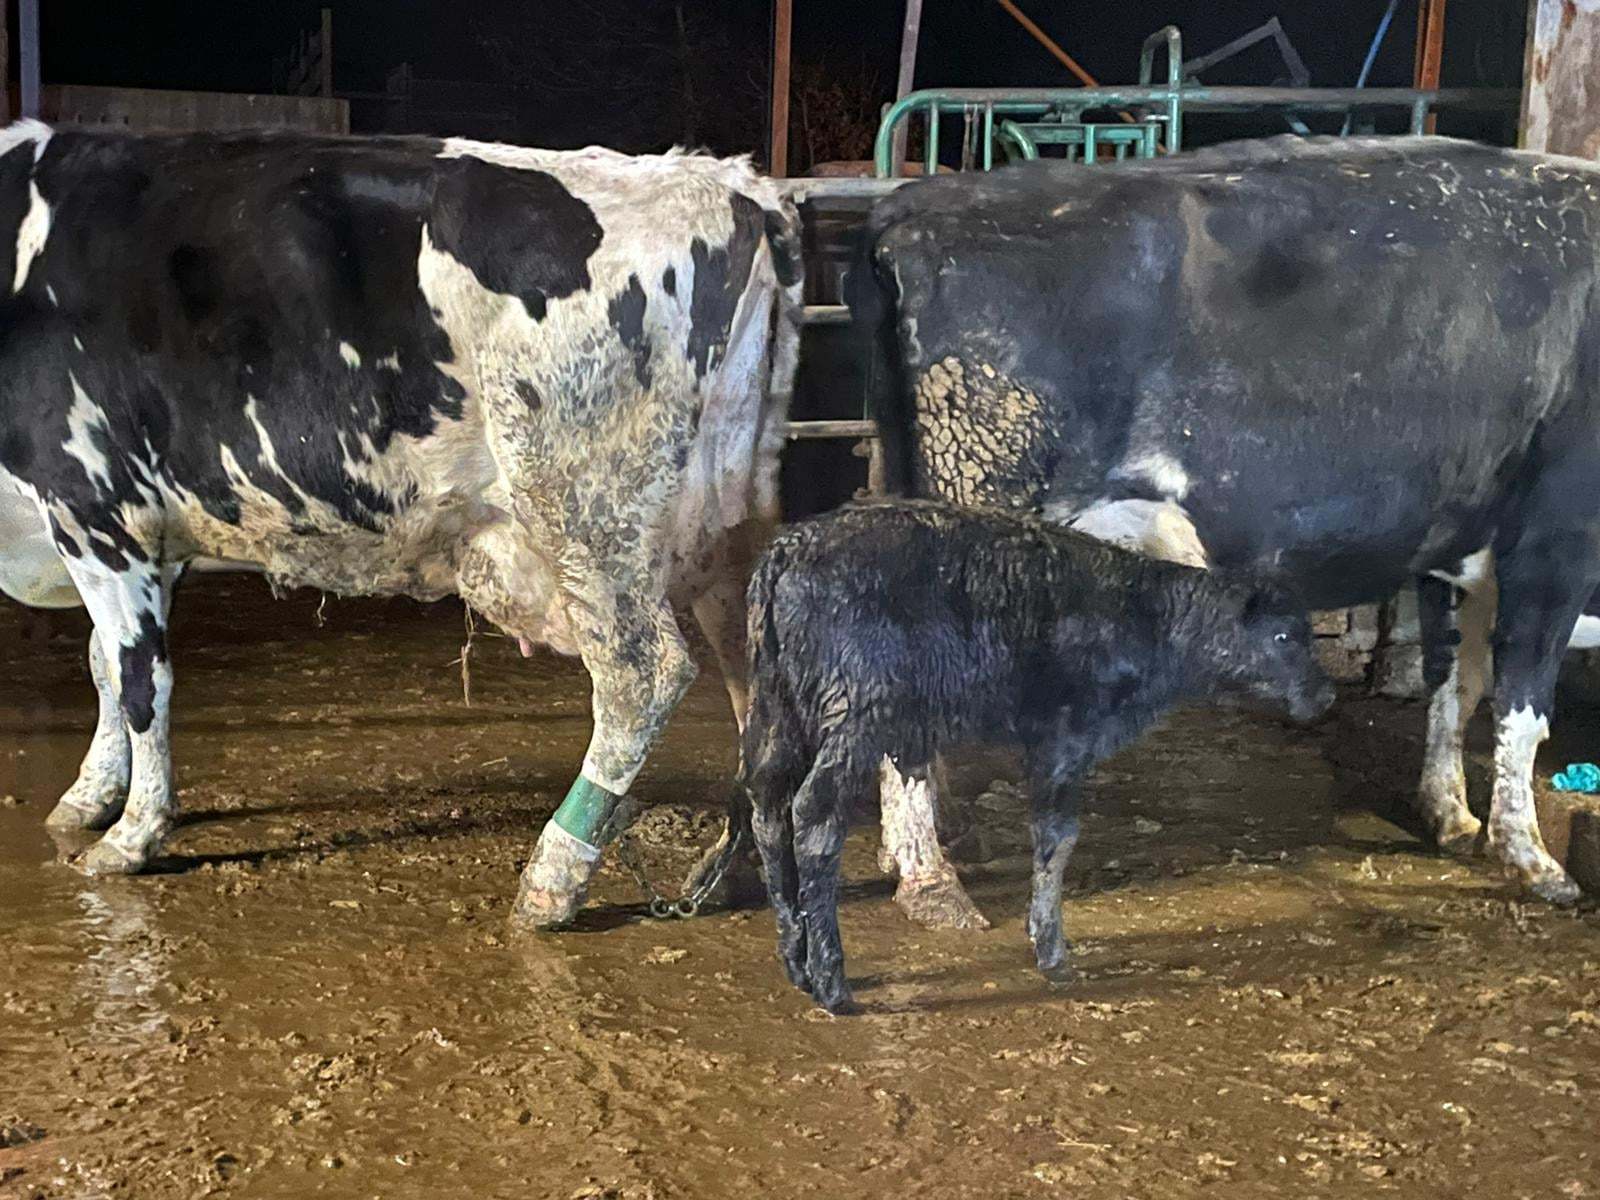 The calf reunitedwith its mother. Picture: Ottery St Mary Fire Station